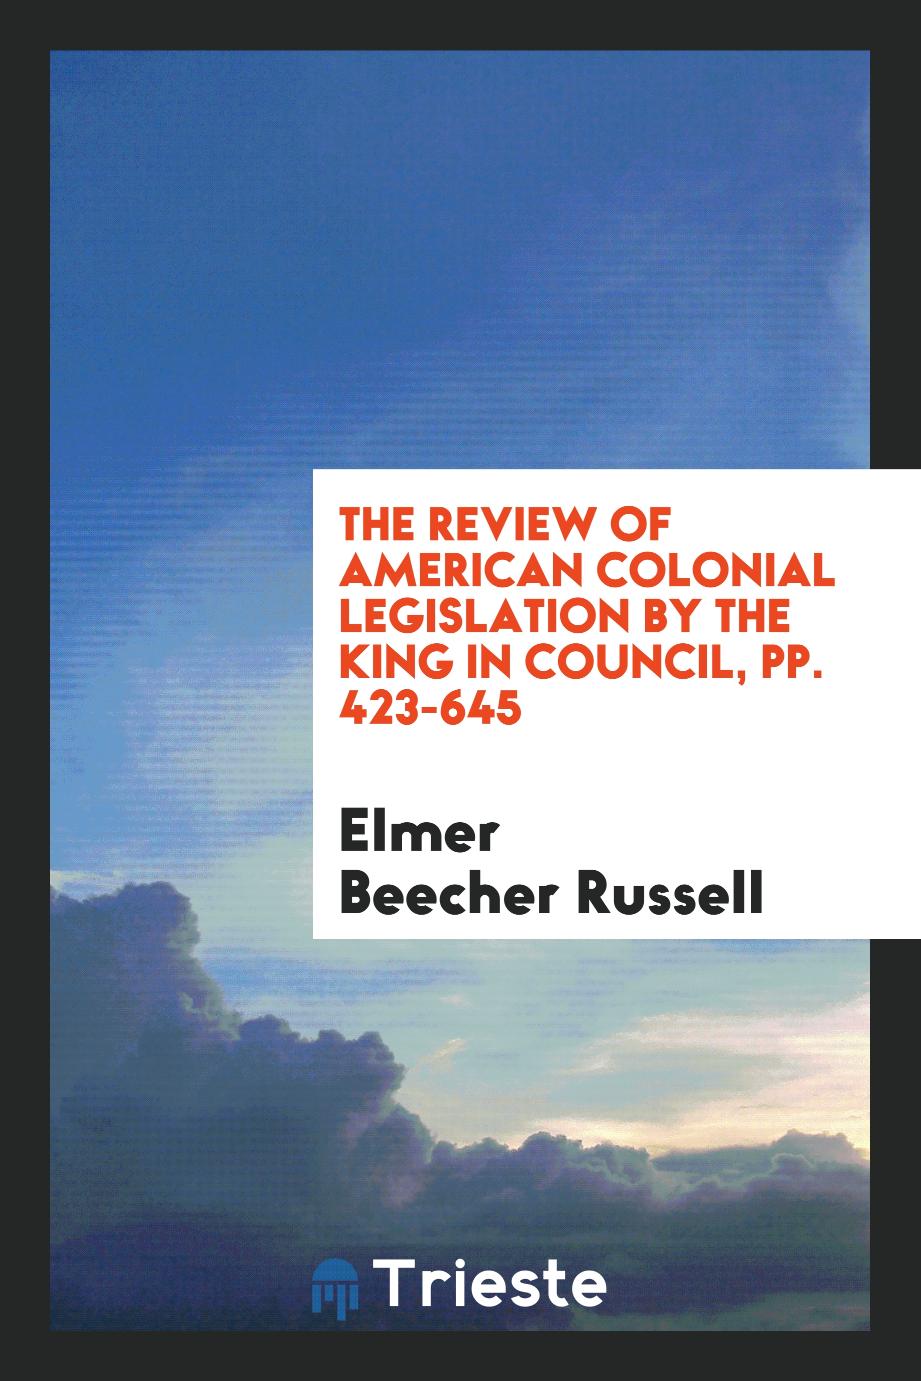 The review of American colonial legislation by the King in council, pp. 423-645